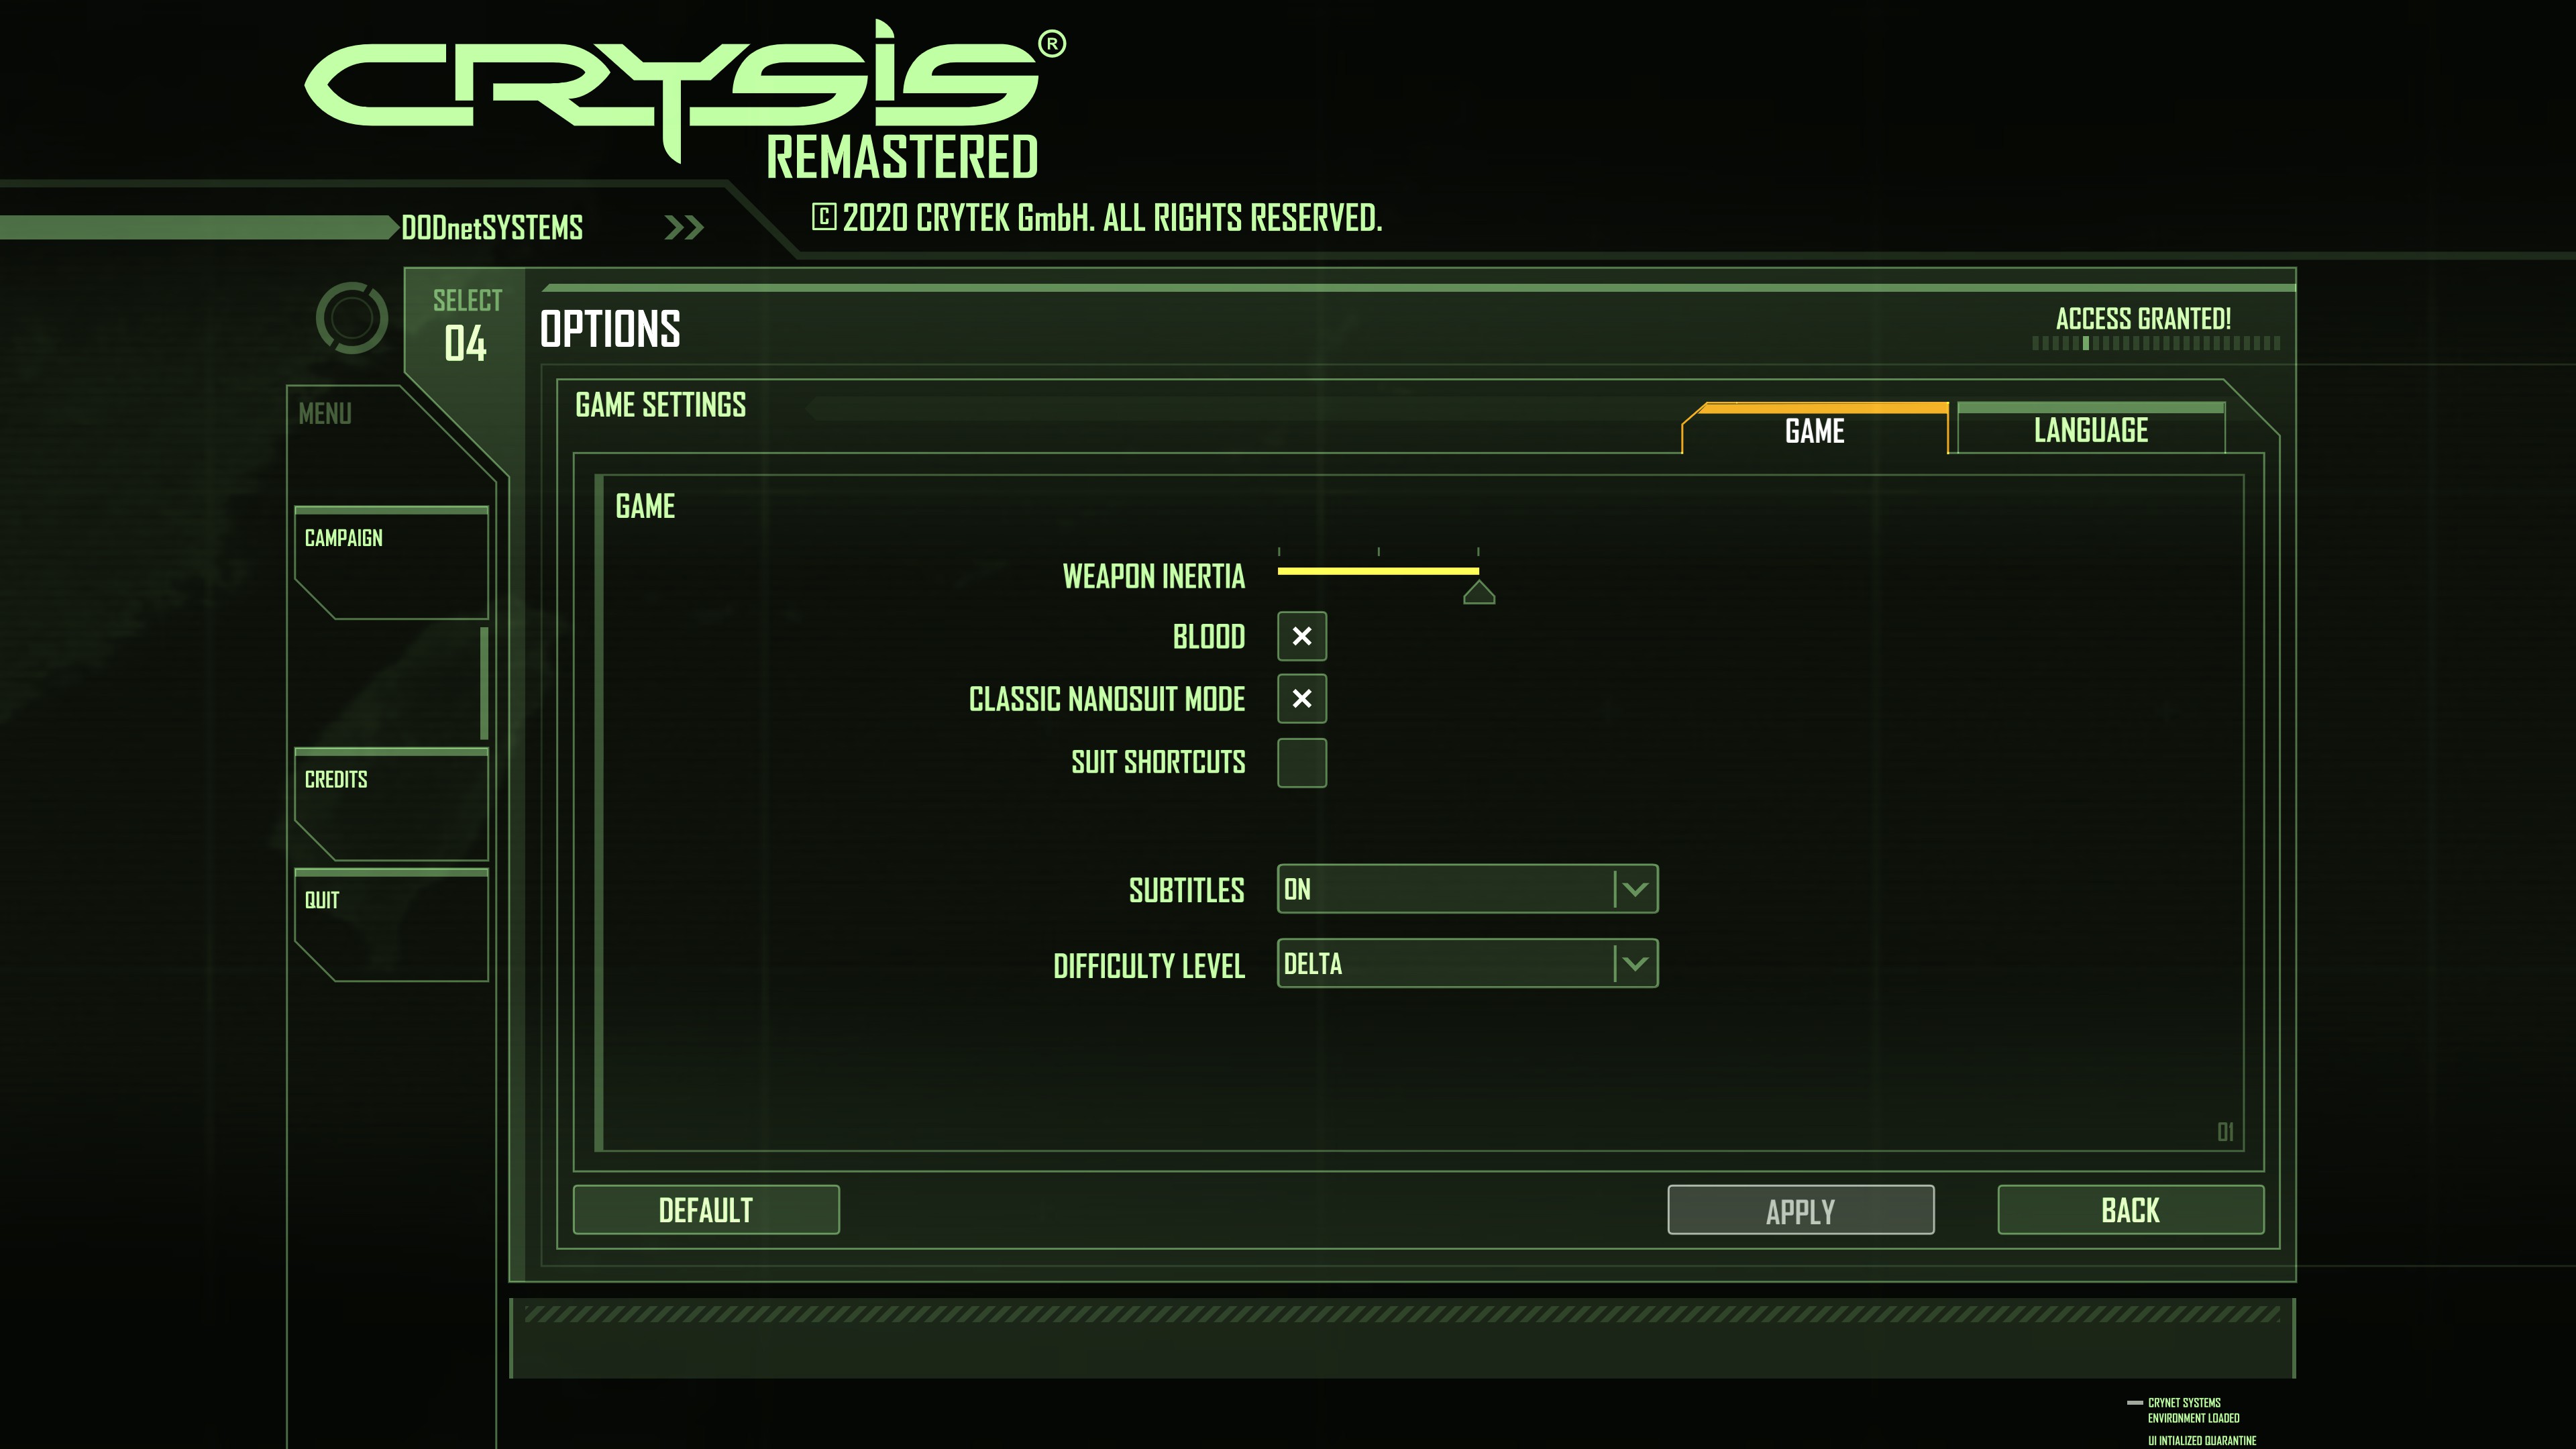 Crysis Remastered How to Change New Nano Suit to Classic Suit Guide - how to enable classic suit mode: - 42D3BE9